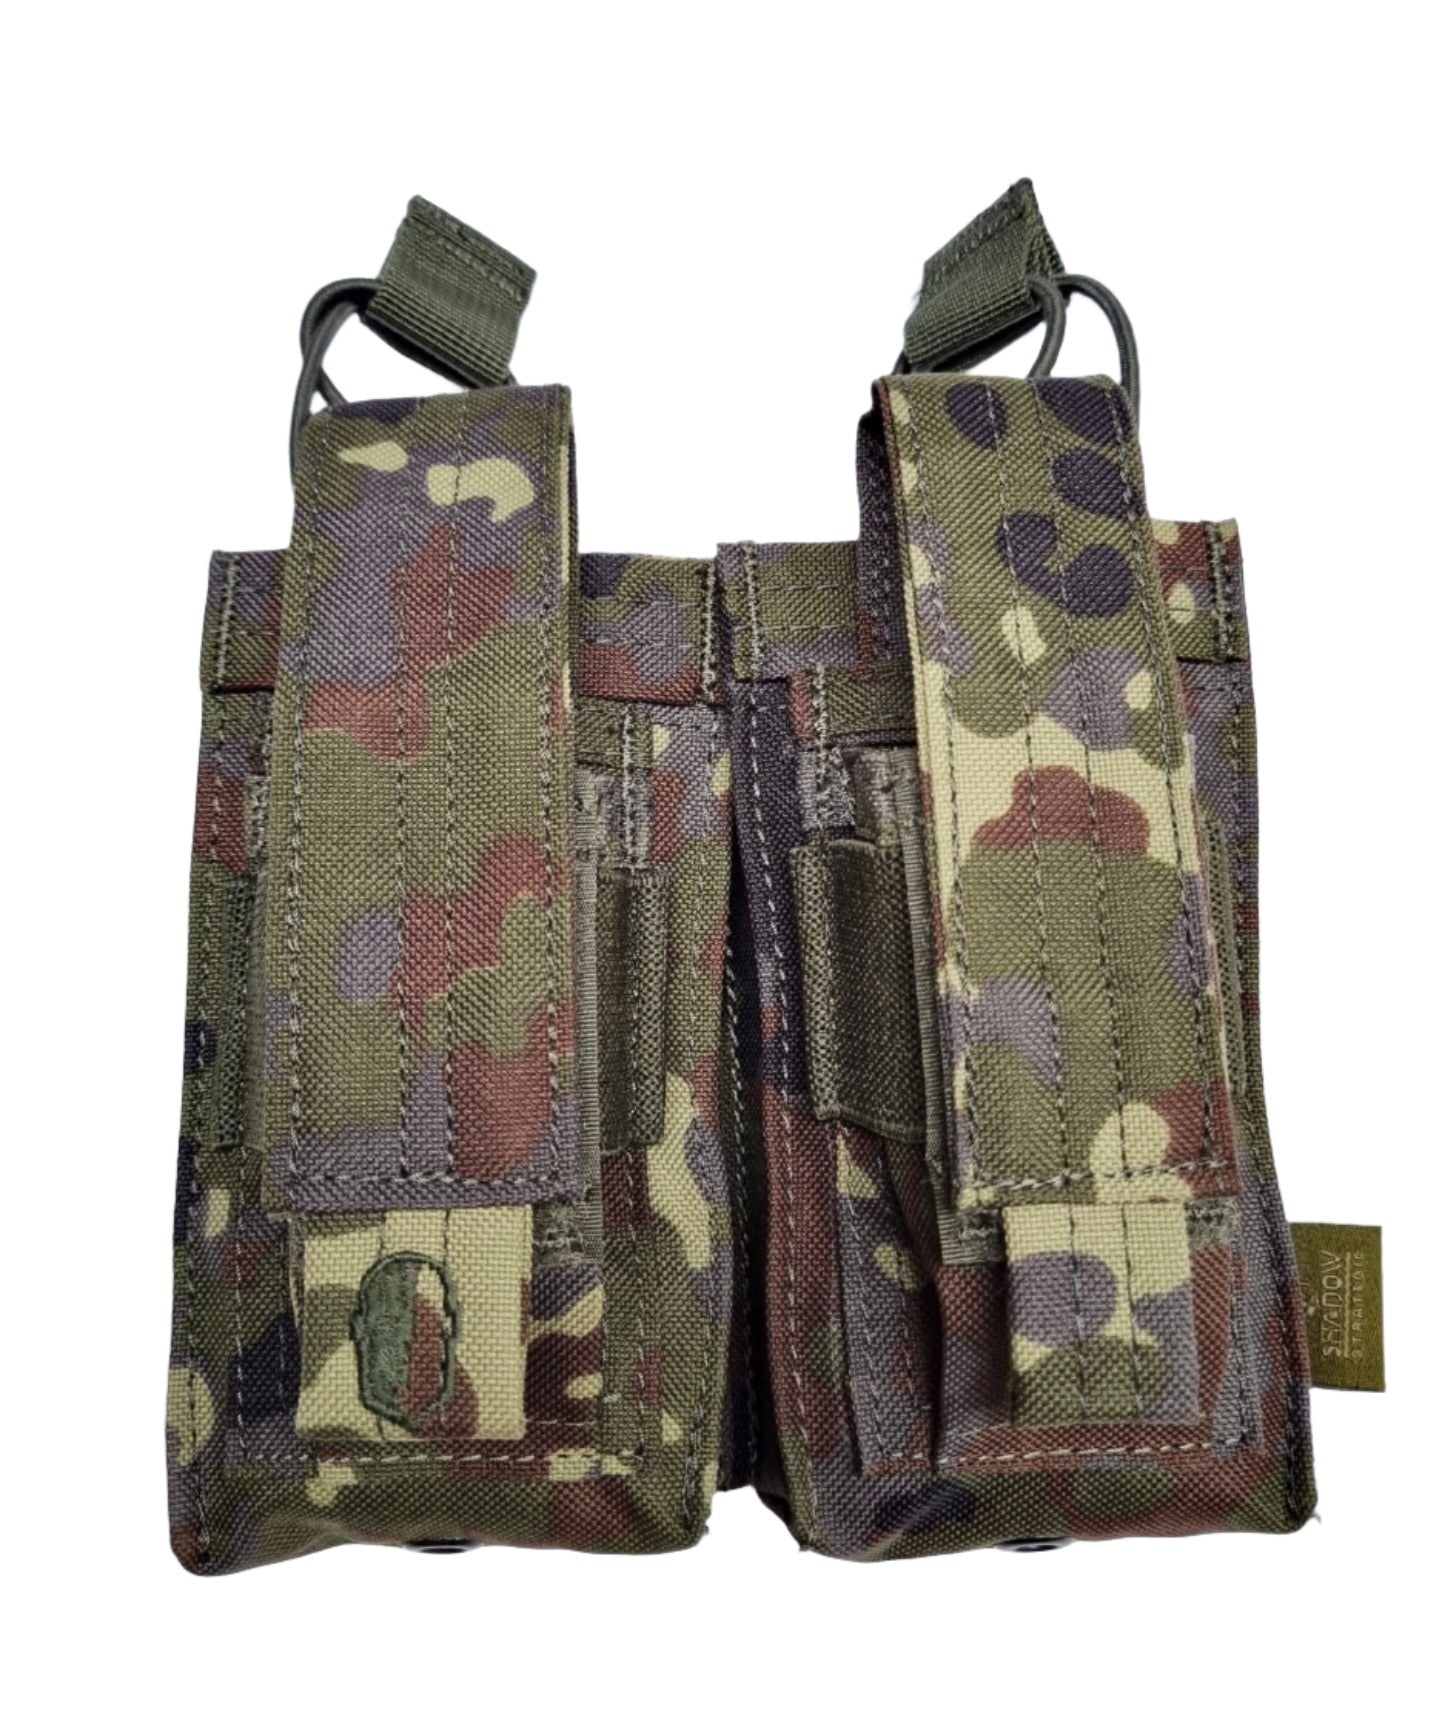 SHS - 22088 AK/9mm DOUBLE  OPEN-TOP MAG POUCH FLECTARN